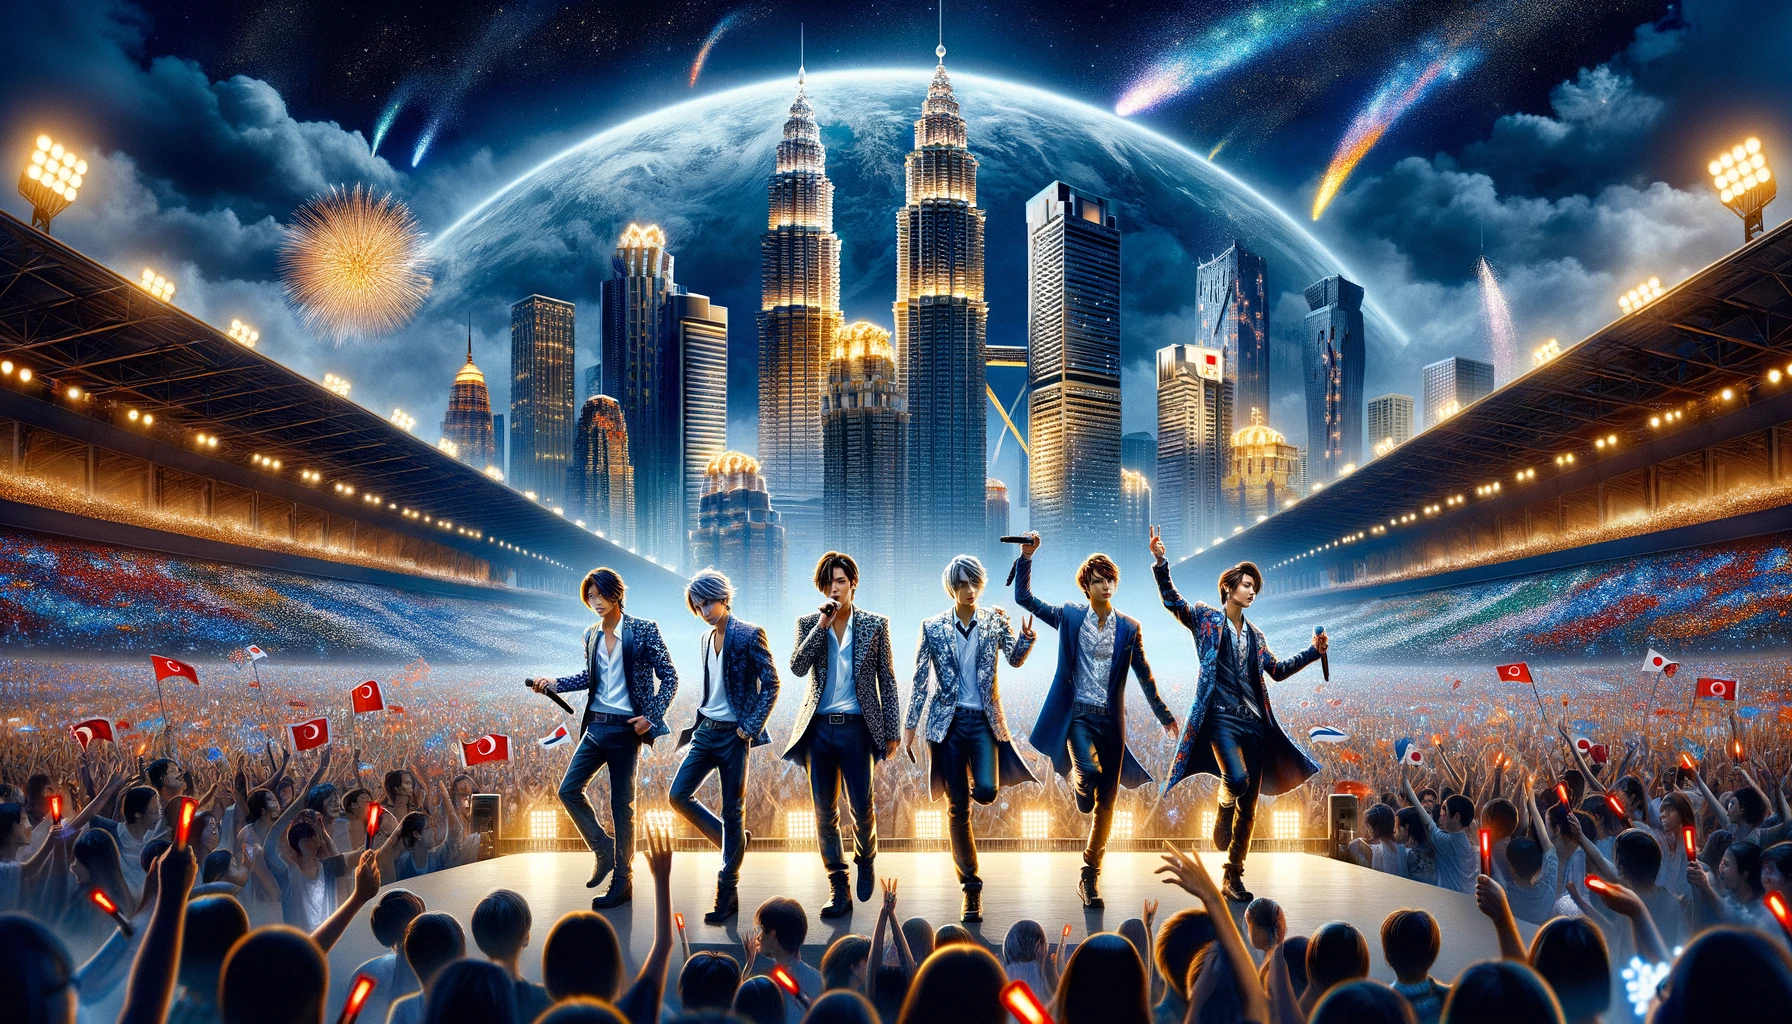 An image of a Japanese male idol group embarking on an Asia tour, depicted at a large outdoor concert venue in Asia. The scene shows the group, consisting of five stylishly dressed young men, performing energetically under a spectacular night sky. The backdrop features iconic Asian city skylines with famous landmarks lit up. The audience, a diverse group of Asian fans, is enthusiastic, waving flags and light sticks. The atmosphere is electric, emphasizing the group's international appeal and the excitement of the tour.